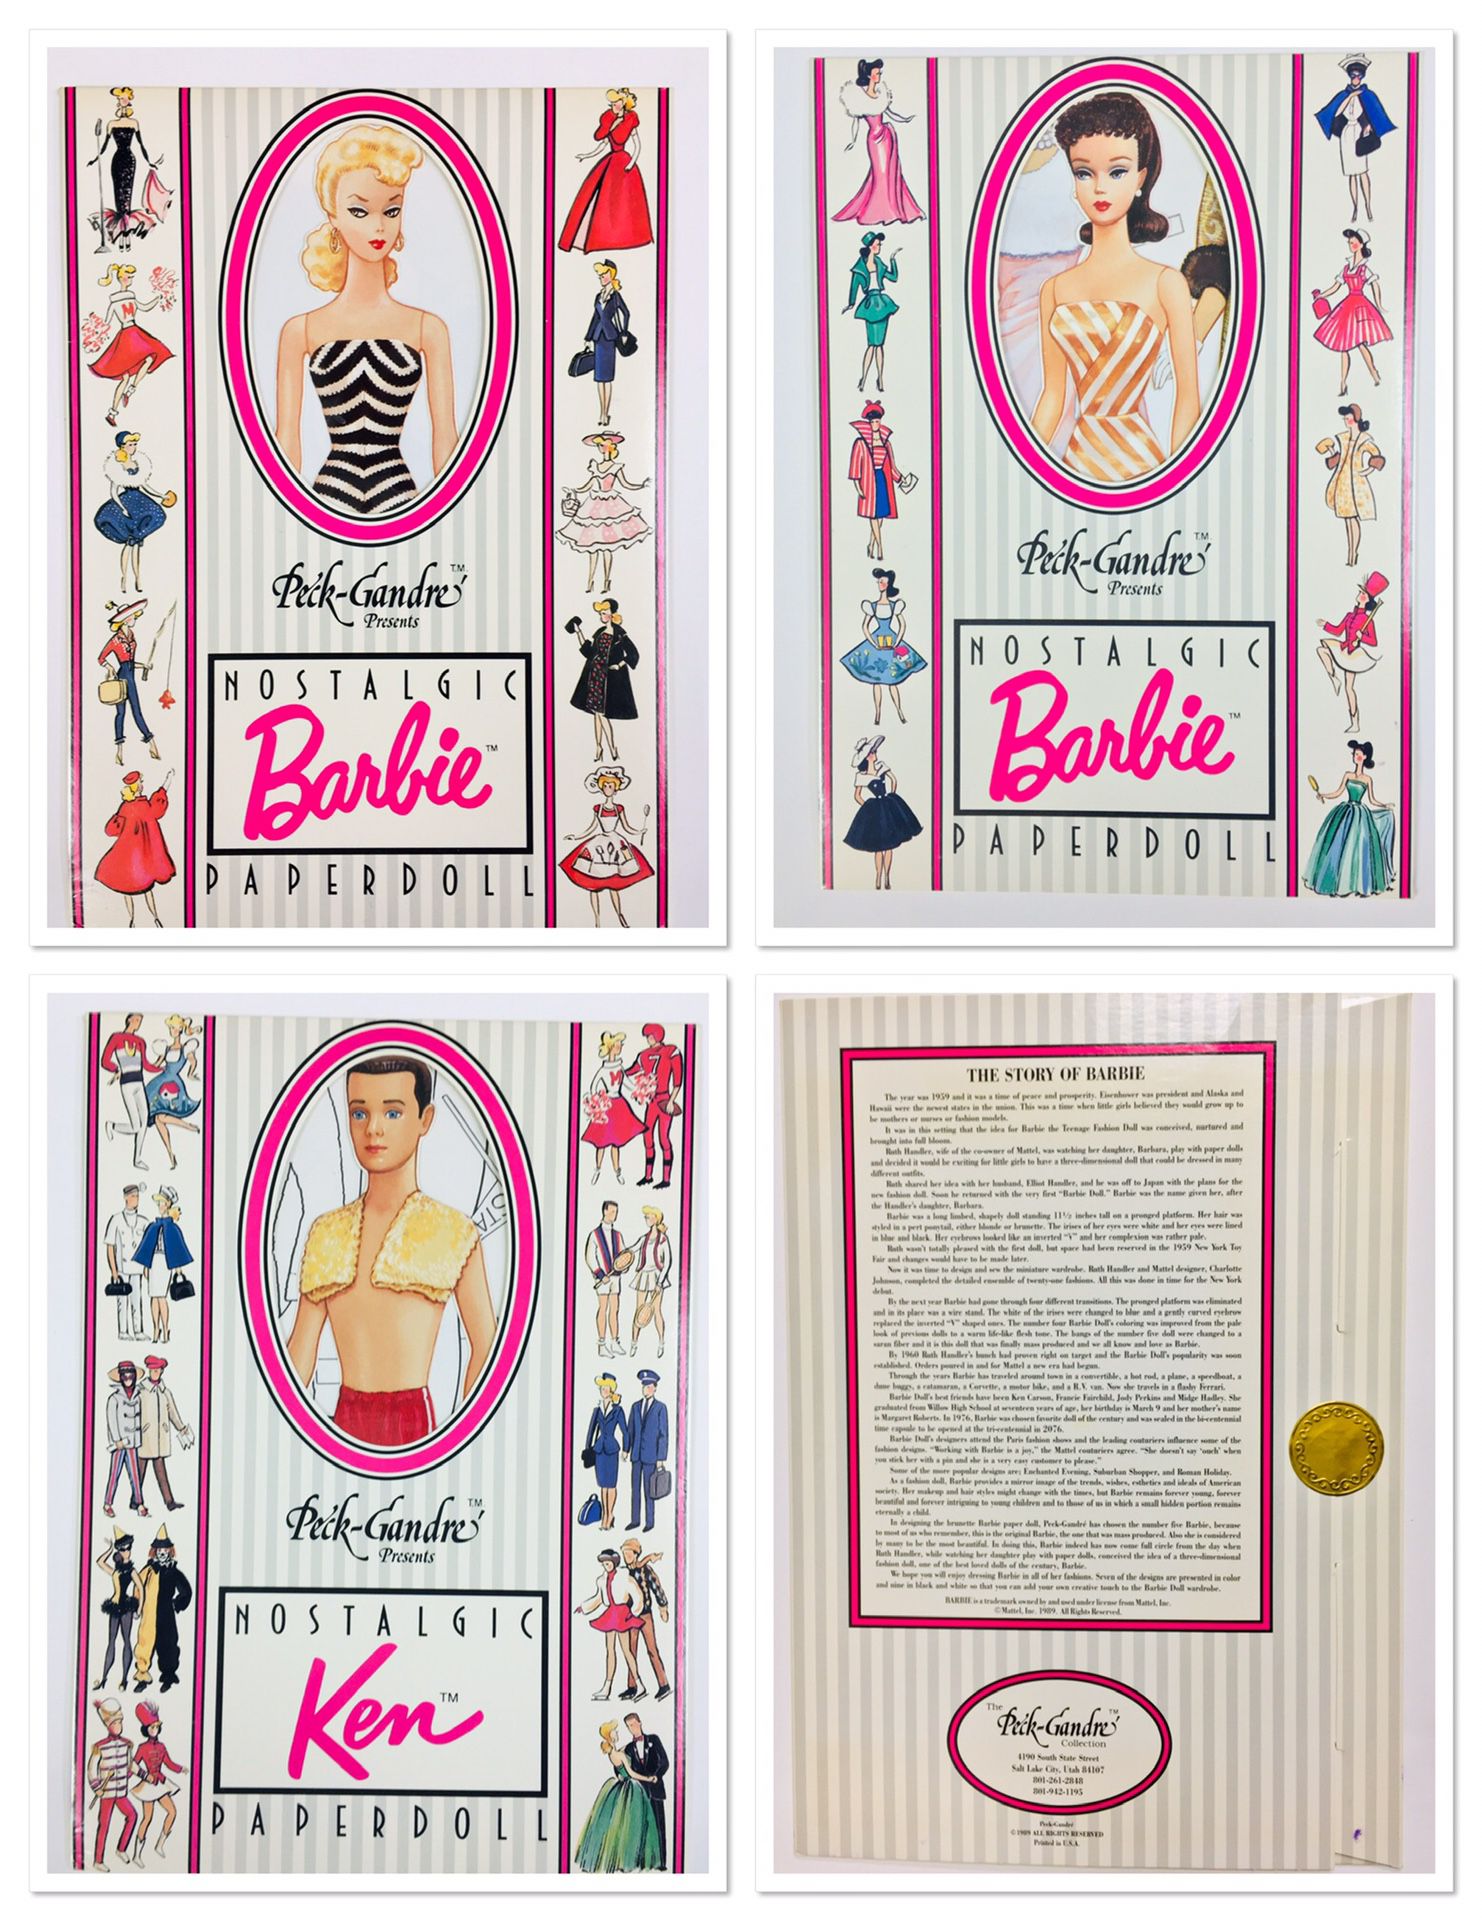 Three sets of vintage Barbie nostalgic paper doll sets. There is brunette Barbie, blonde Barbie, and Ken. Each set comes with a 12 inch paper towel a